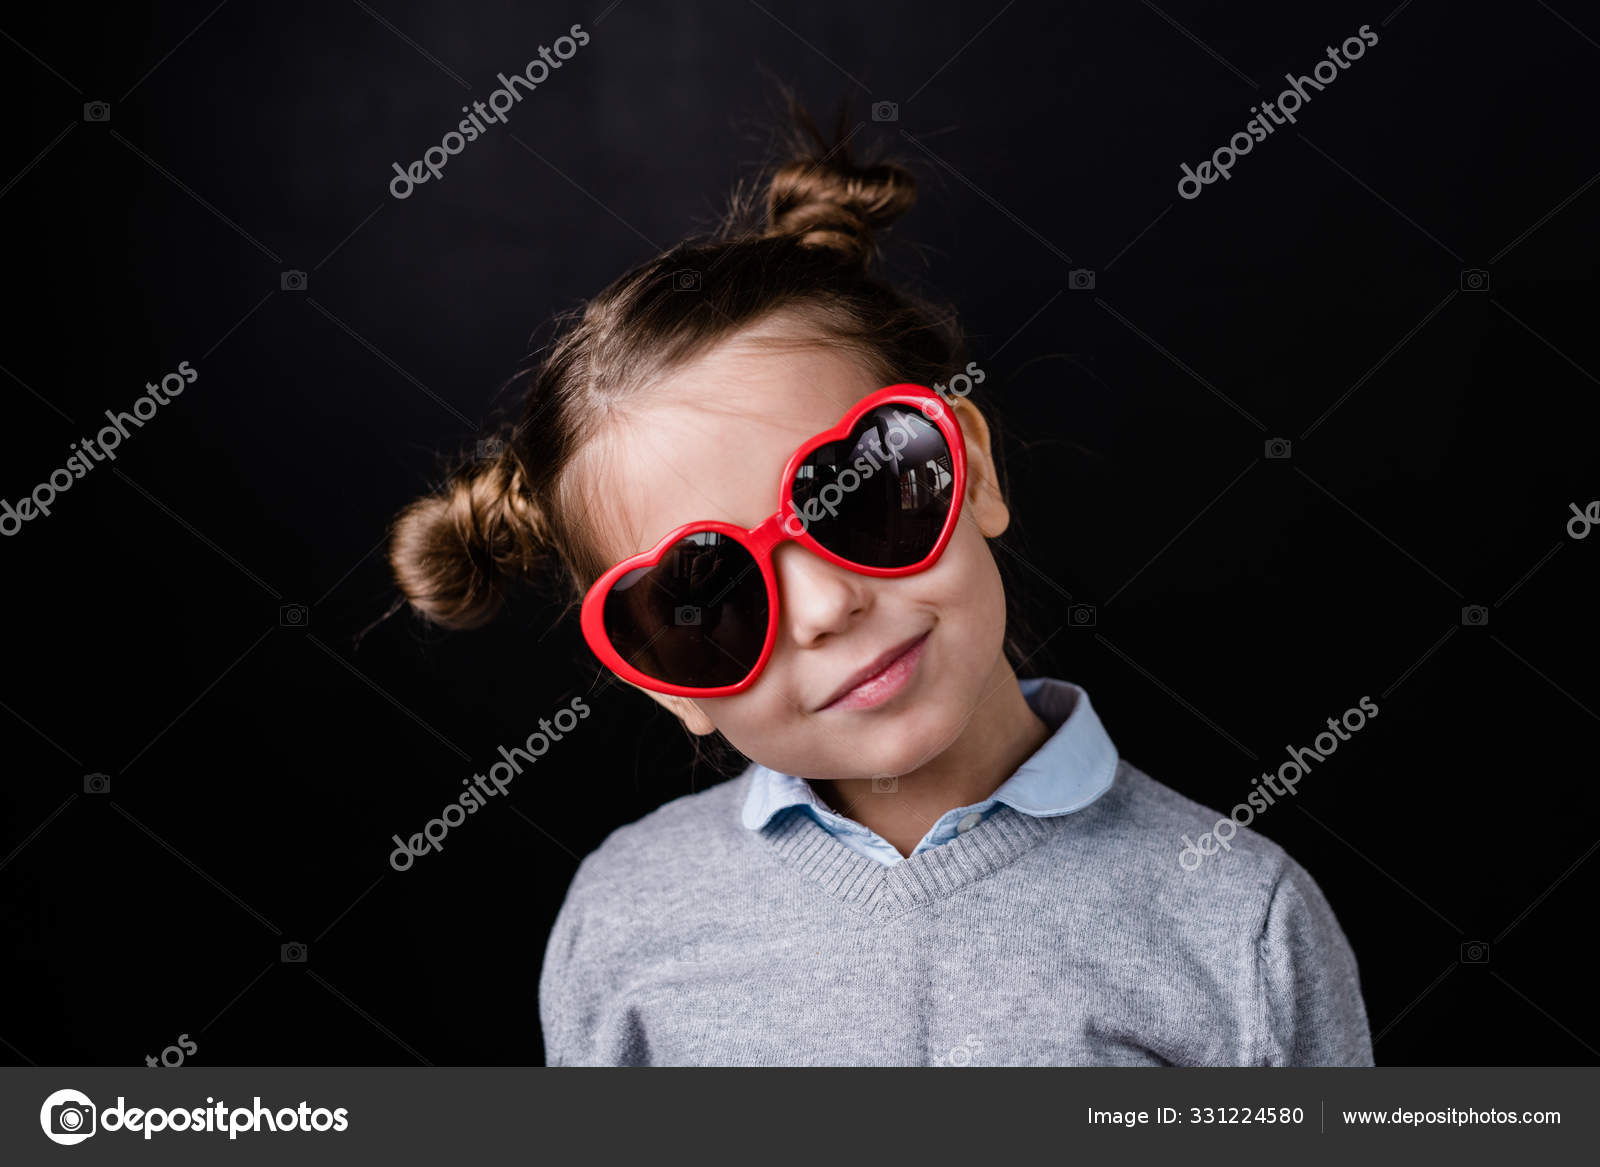 Premium Photo | Fashion portrait of a young woman in sunglasses posing near  neon signs in night club